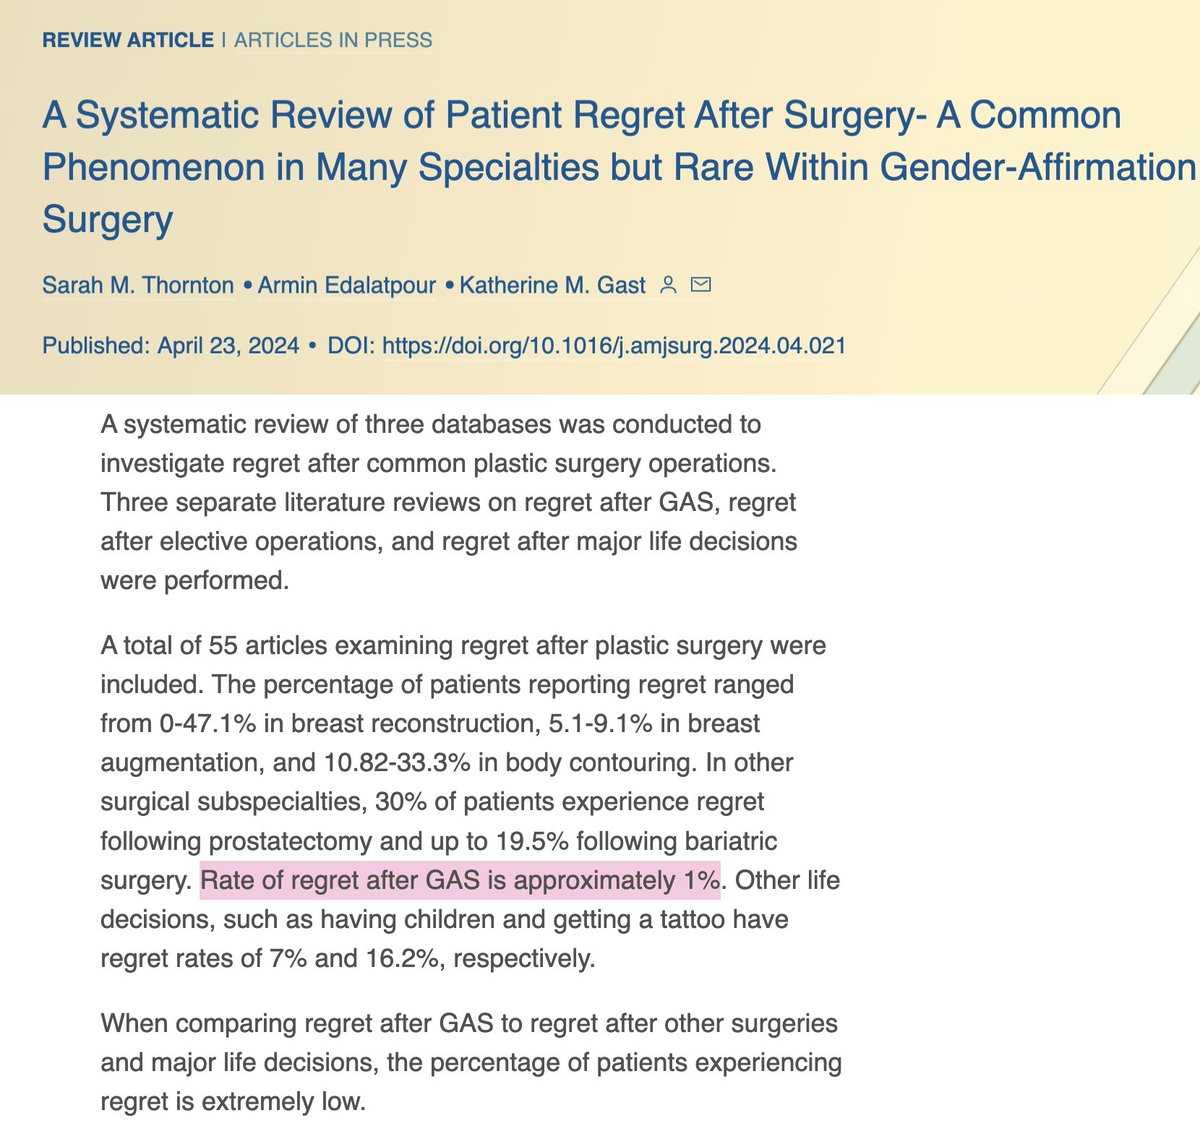 Just another systematic review finding that transition-related surgeries have extremely low rates of regret compared with other things we have no problem letting people decide to do.